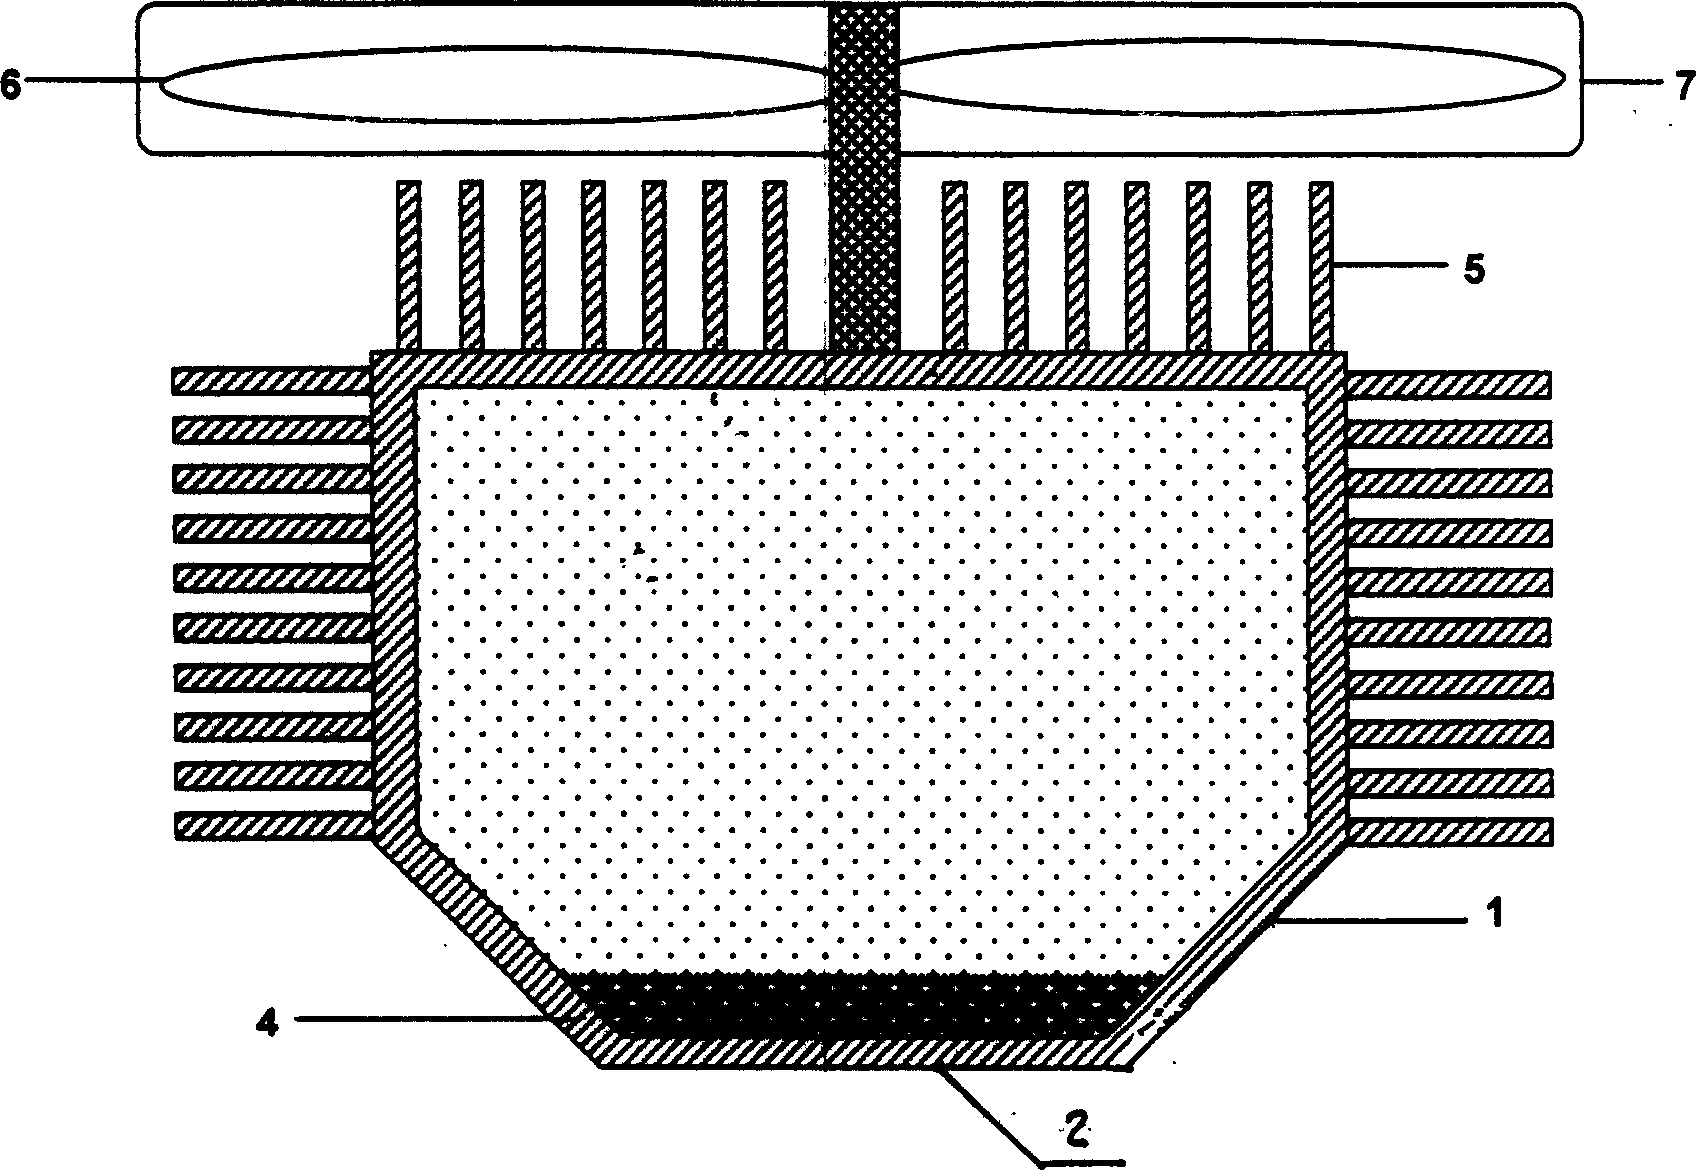 Solute-dissolving, temperature-reducing and cooling device for reducing computer chip temperature